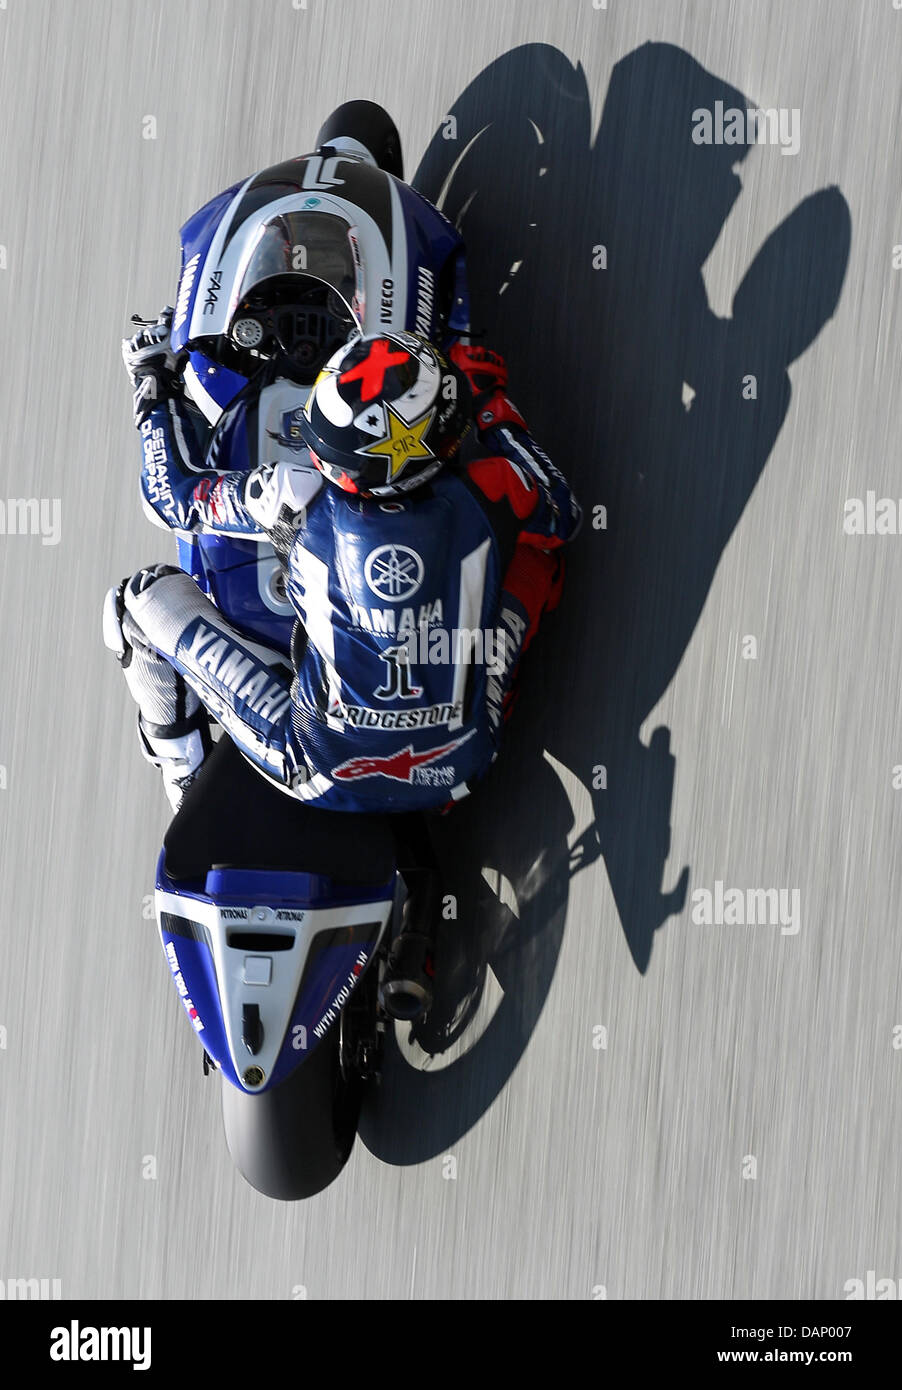 The Spanish Yamaha driver Jorge Lorenzo  drives his motorcycle in a MotoGP race training on the Sachsenring circuit in Hohenstein-Ernstthal, Germany, 16 July 2011. Photo: Jan Woitas Stock Photo